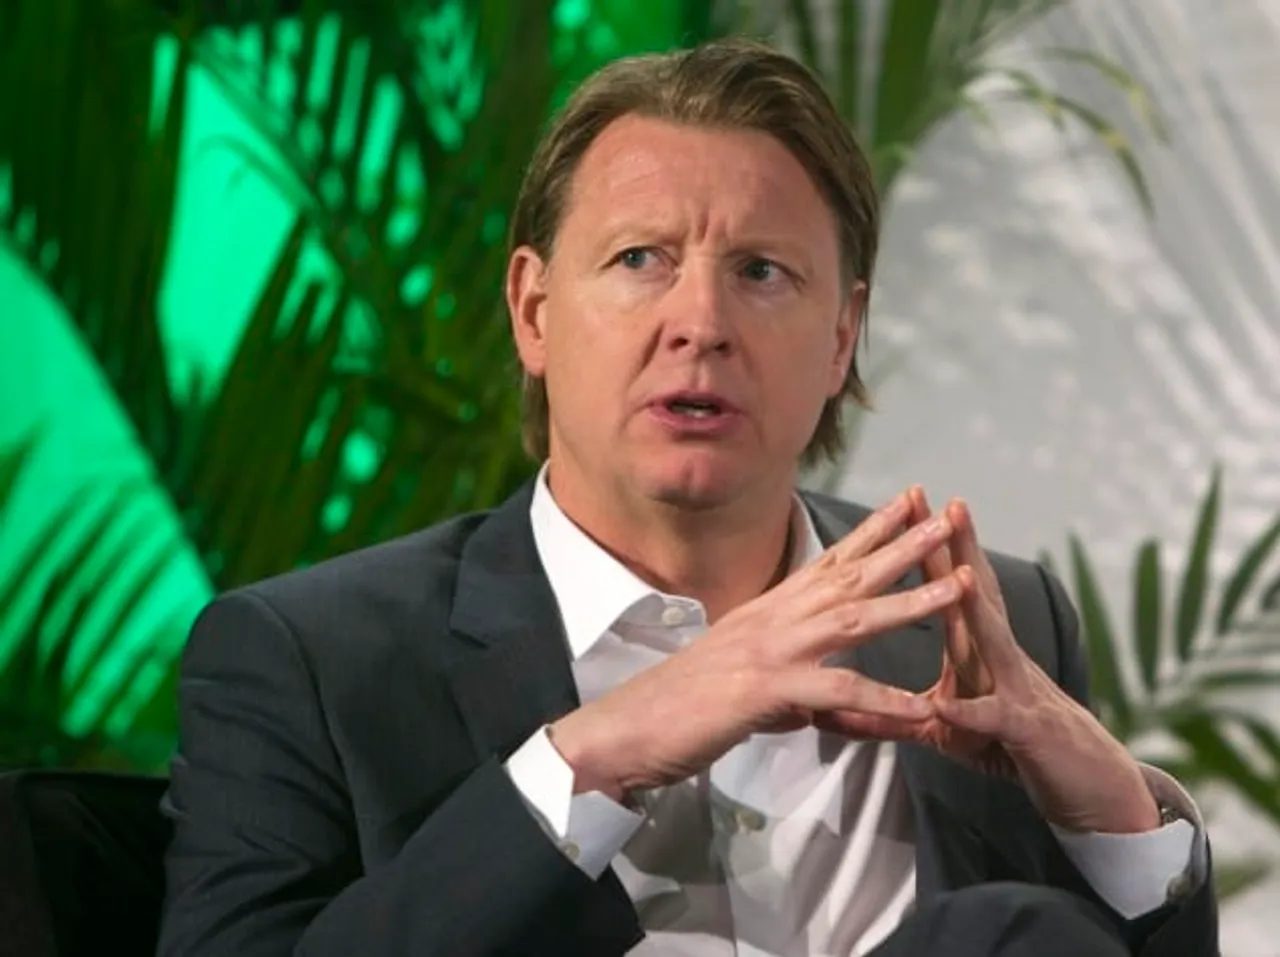 Digital disruption will come to every industry in 2016: Ericsson CEO Hans Vestberg